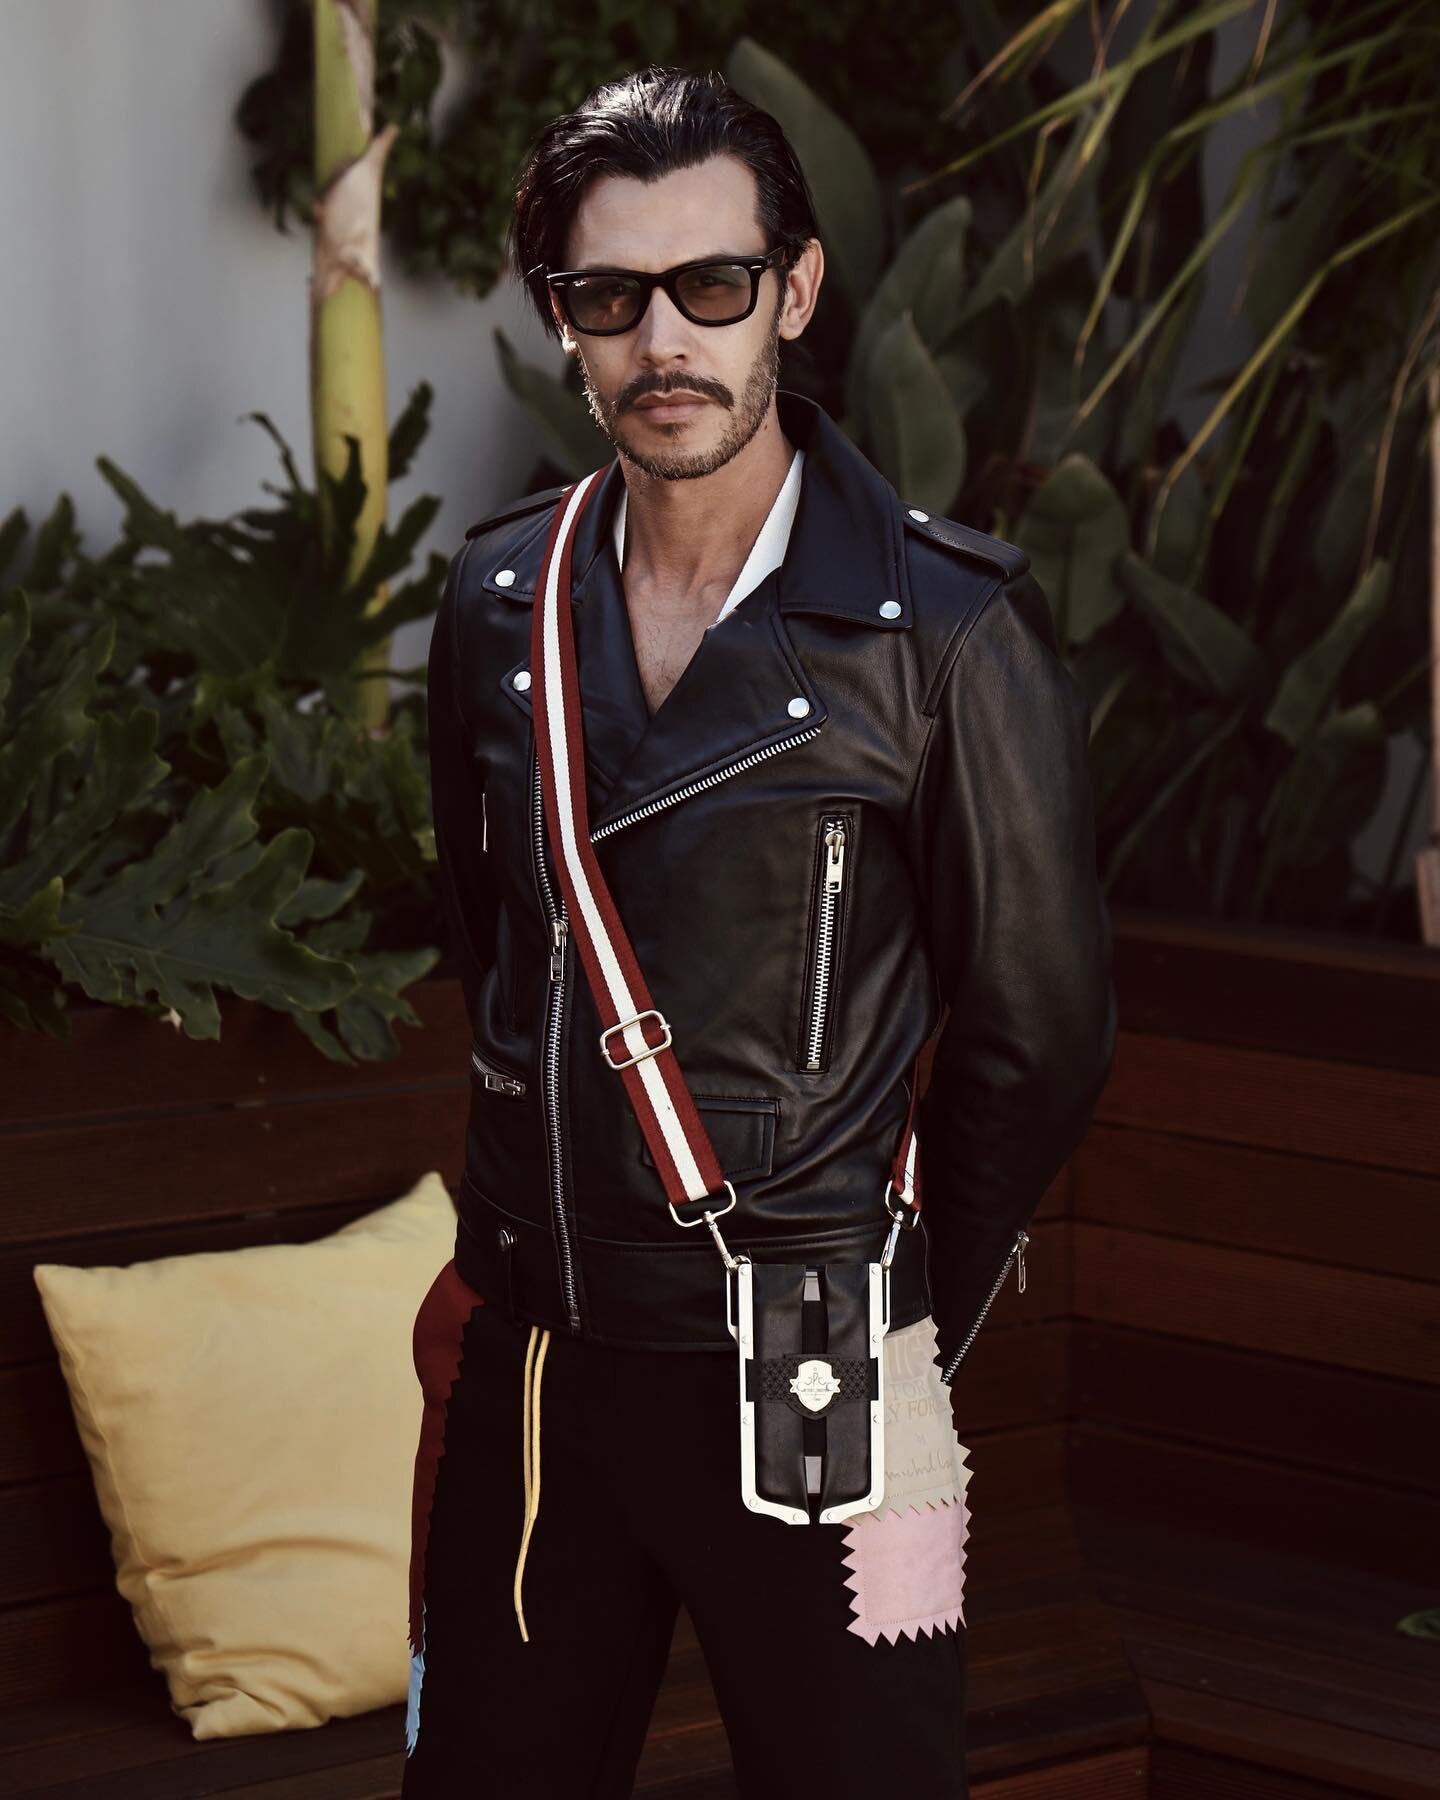 The most stylish iPhone accessory that I have ever seen! What do you guys think ? 
Jacobsman.com  for the full story. 

Accessory @john_patrick_christopher Leather Jacket by @issaleo 
Track pants by @pumasouthafrica 

#jacobsman #style #menswear #lov